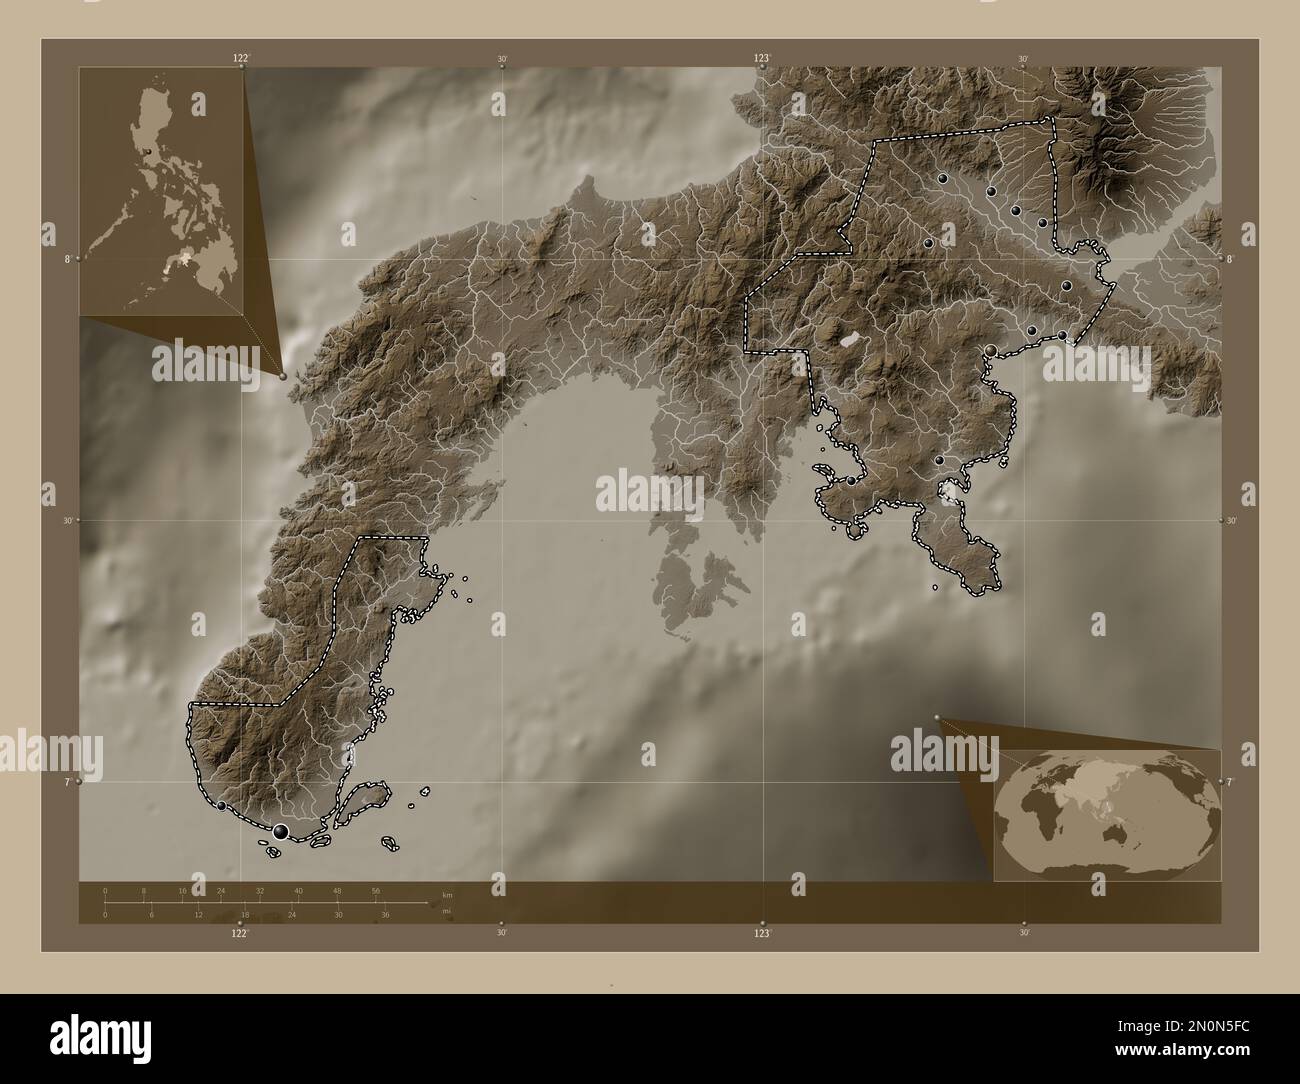 Zamboanga del Sur, province of Philippines. Elevation map colored in sepia tones with lakes and rivers. Locations of major cities of the region. Corne Stock Photo